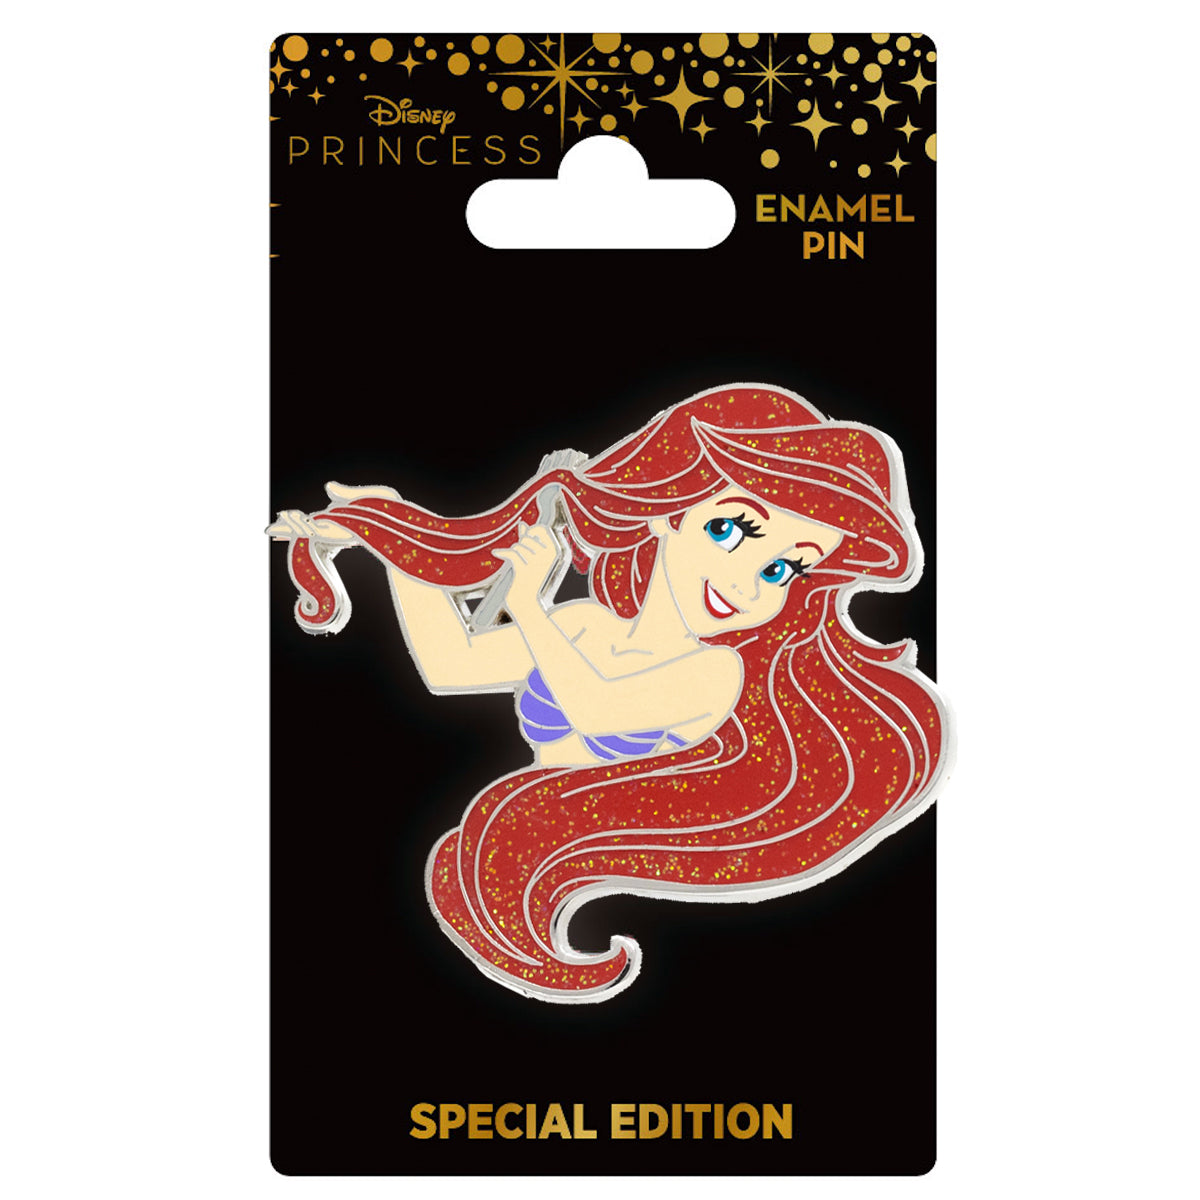 Disney Princess - Ariel 2.0" Collectible Pin Special Edition 500 - NEW RELEASE